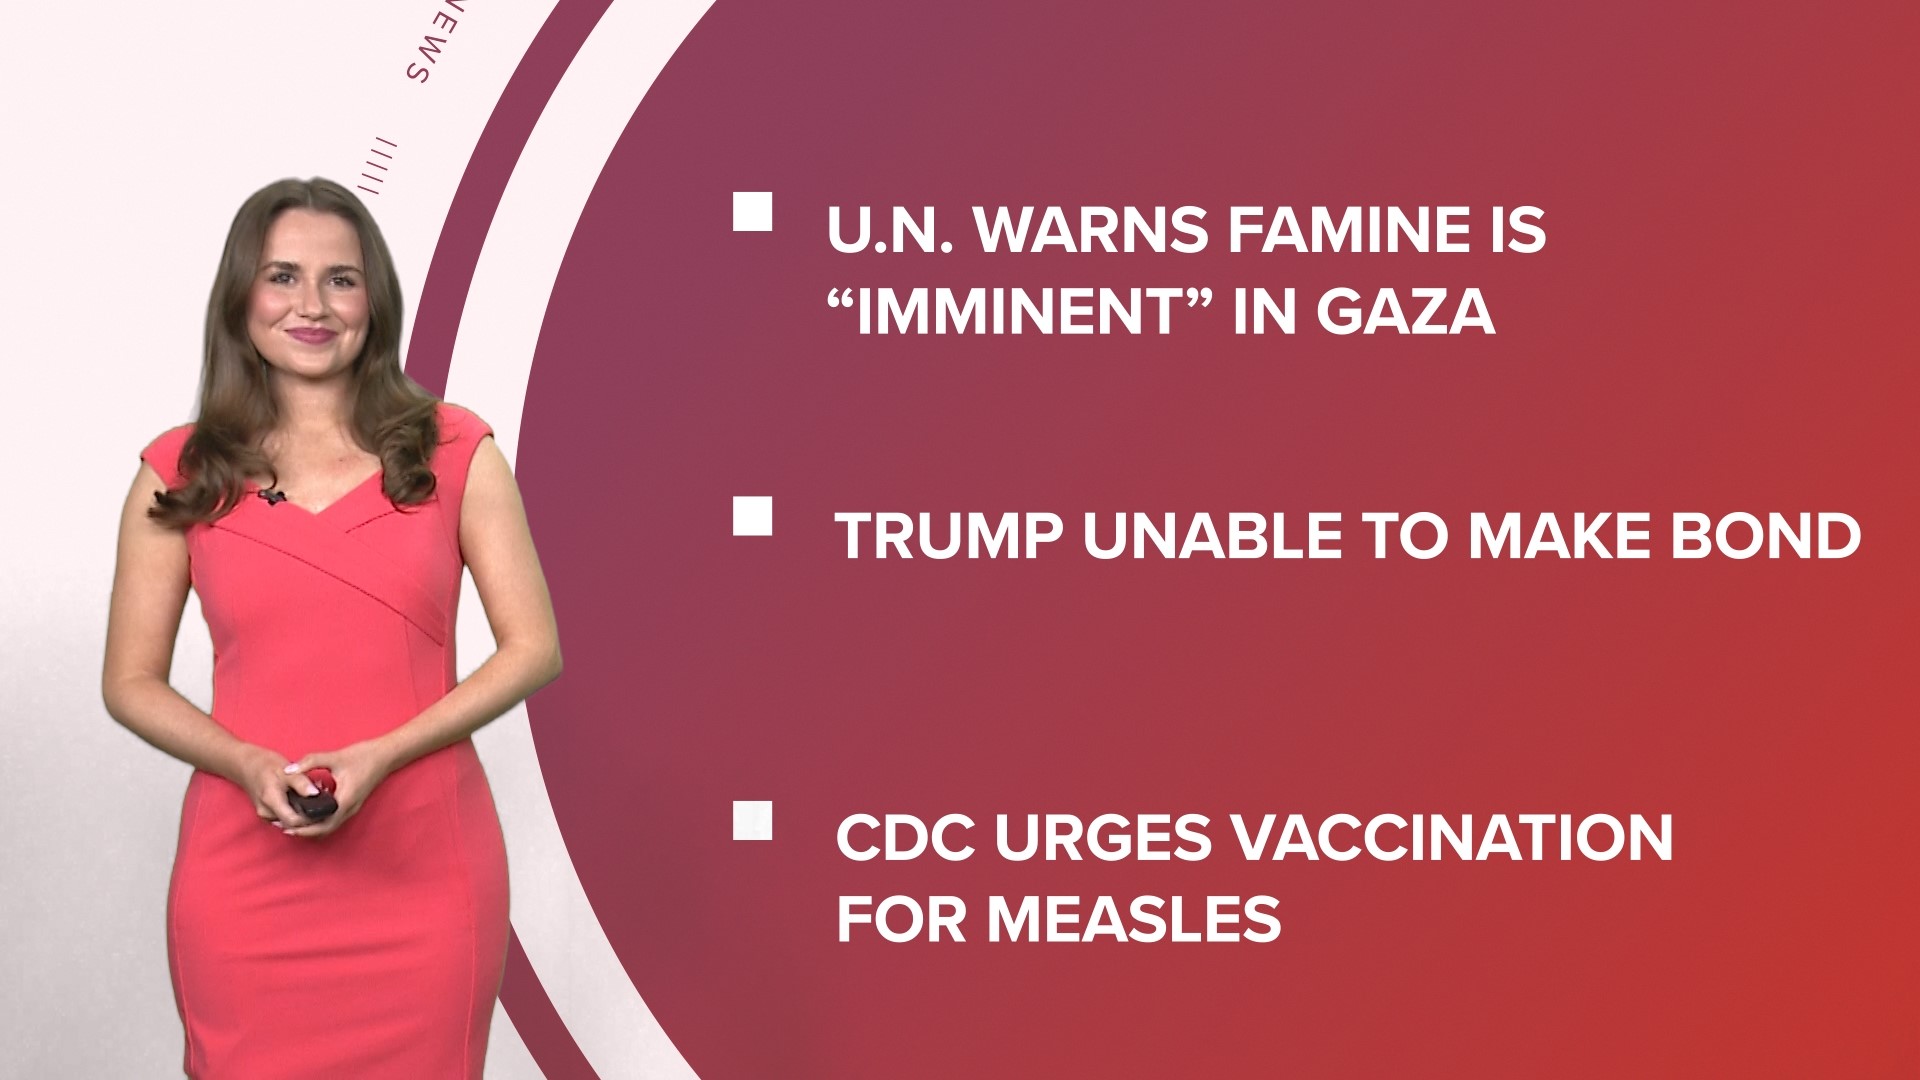 A look at what is happening in the news from a U.N. warning that famine is imminent in Gaza to Trump having trouble paying bond and verifying allergy remedies.